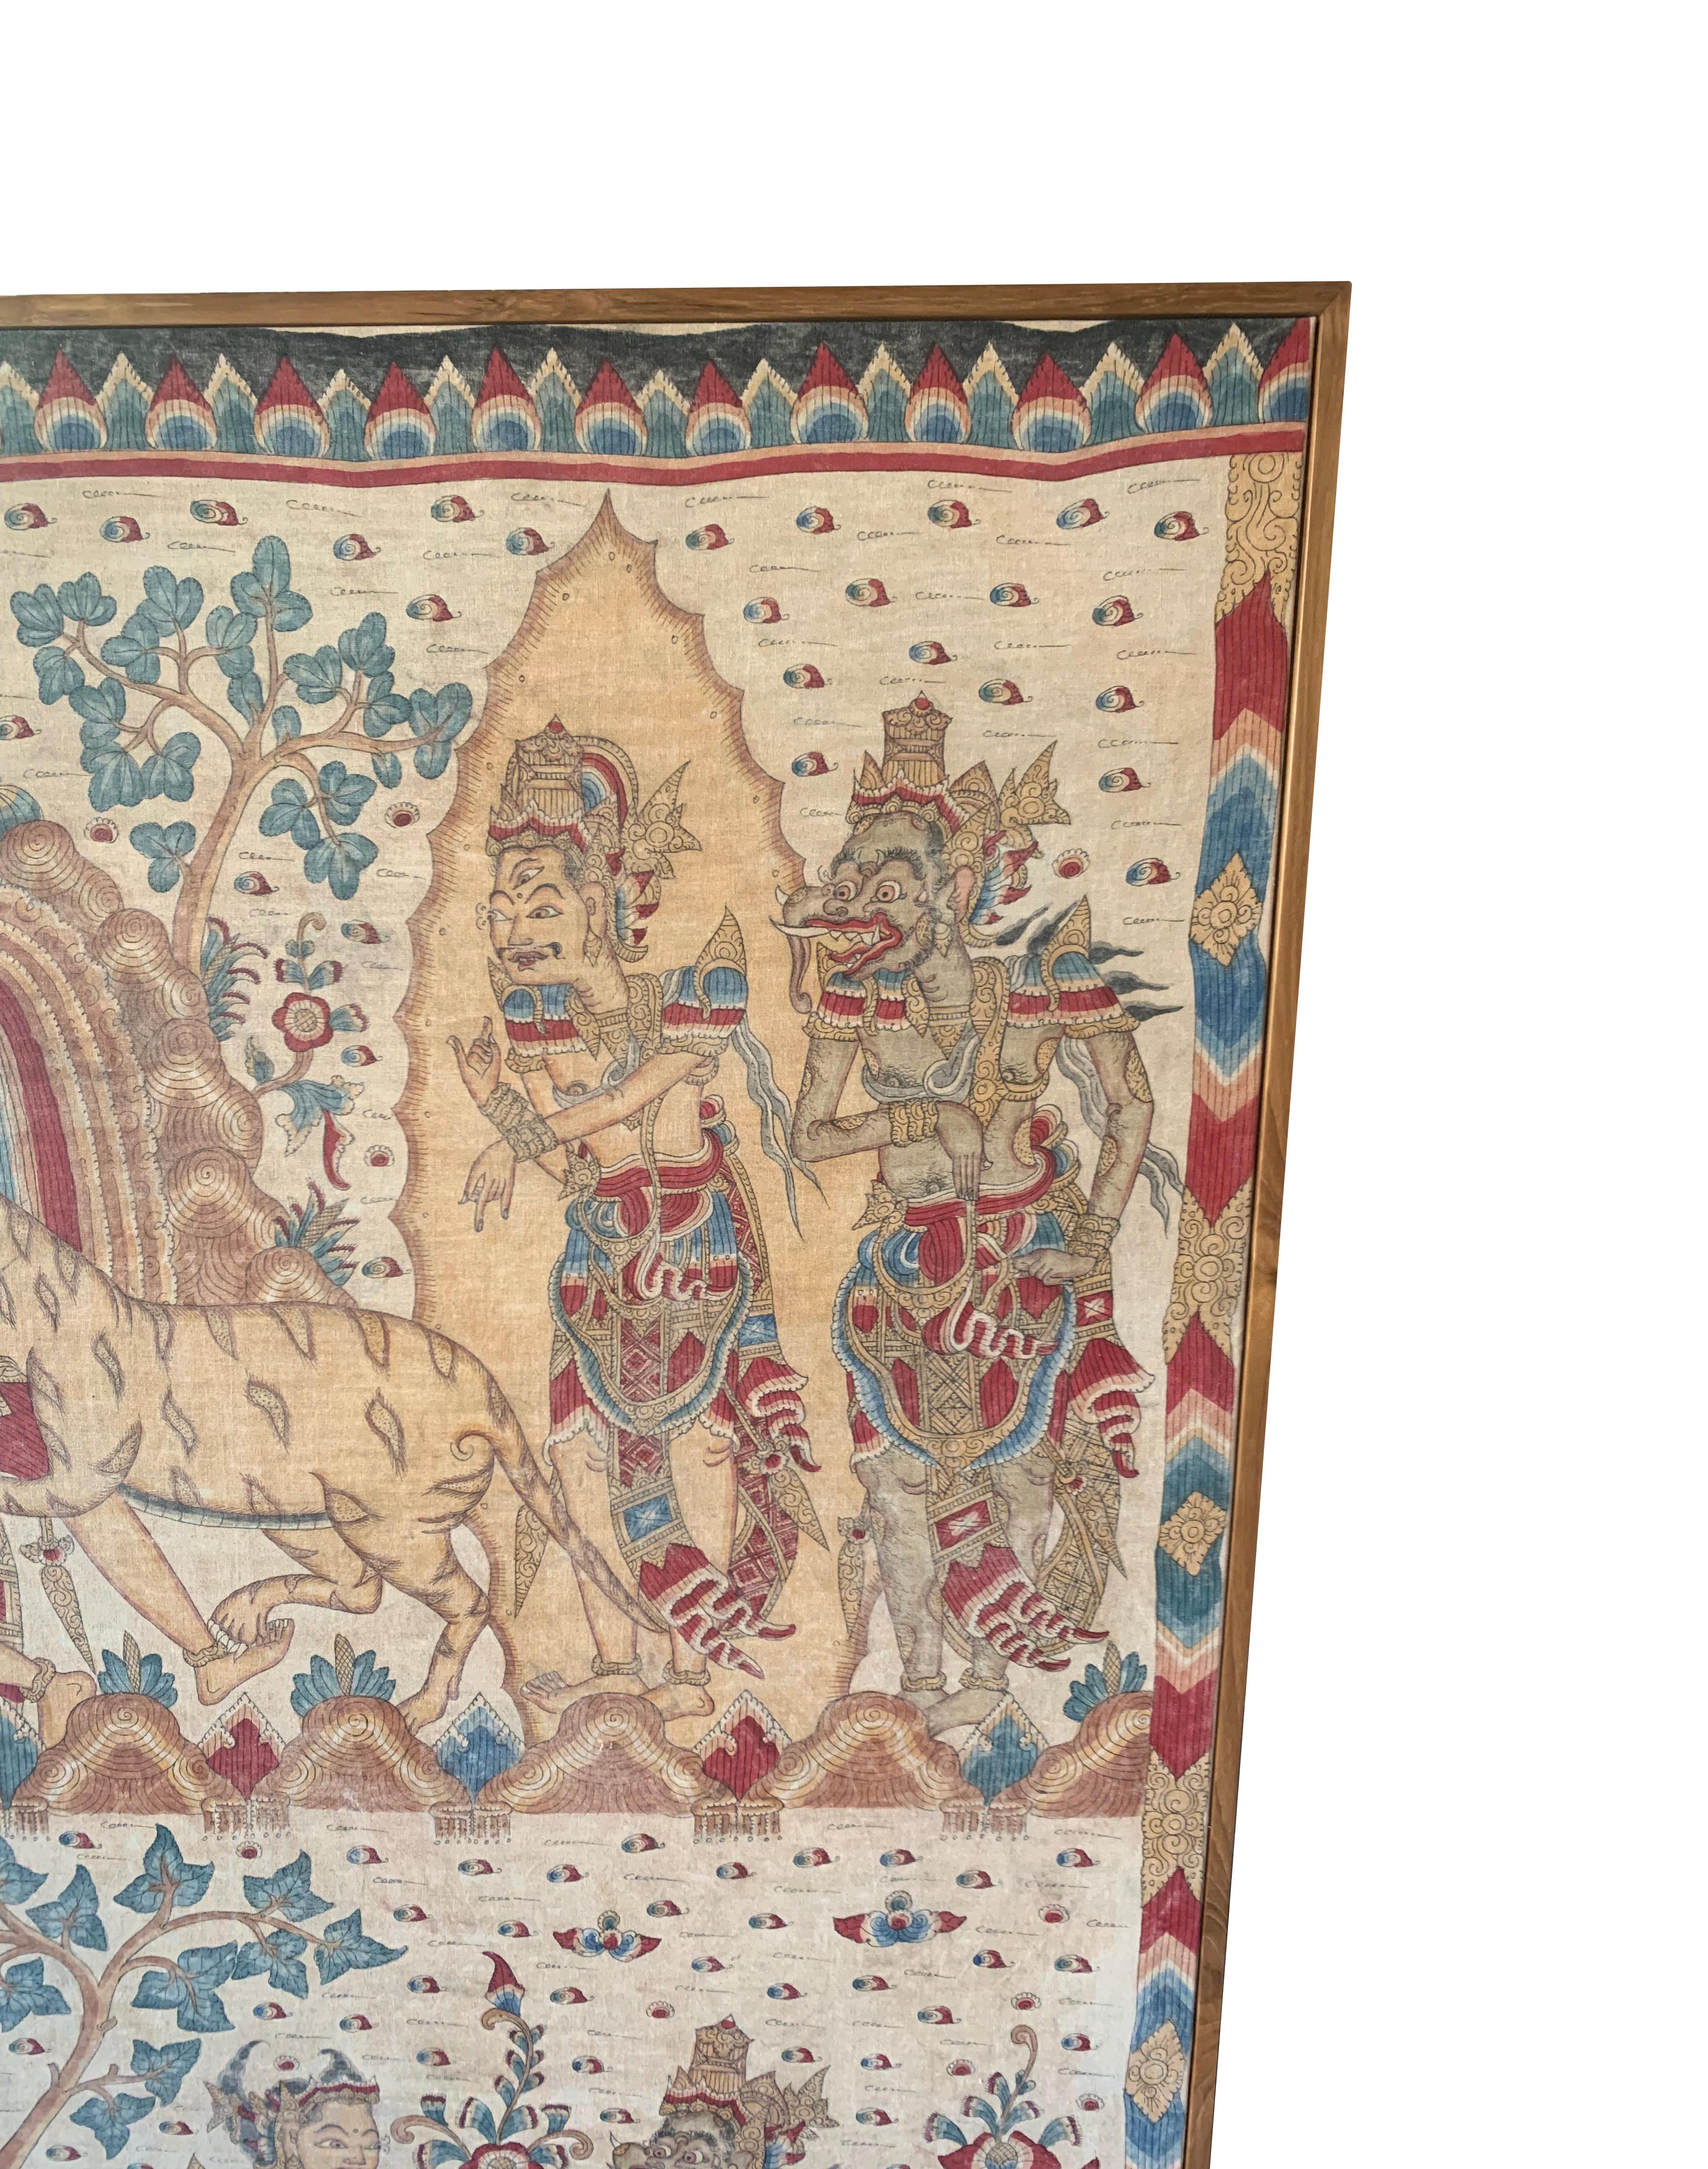 Mid-20th Century Bali Hindu Textile Framed 'Kamasan' Painting, Indonesia C. 1950 For Sale